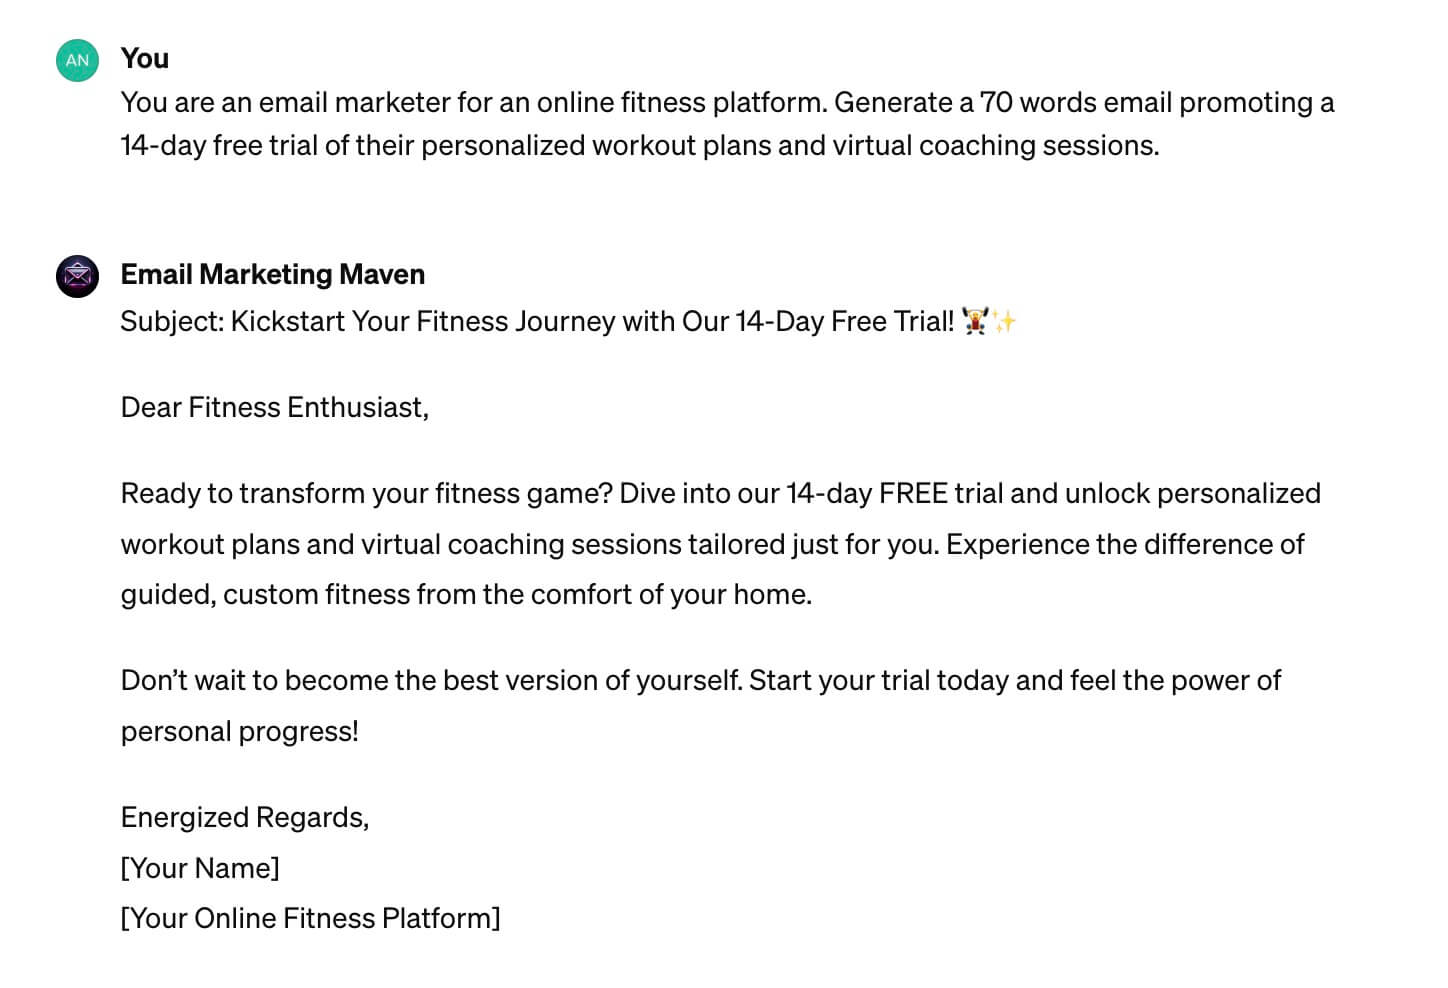 Screenshot showcasing an email prompt to promote a 14-day free trial of personalized workout plans on an online fitness platform